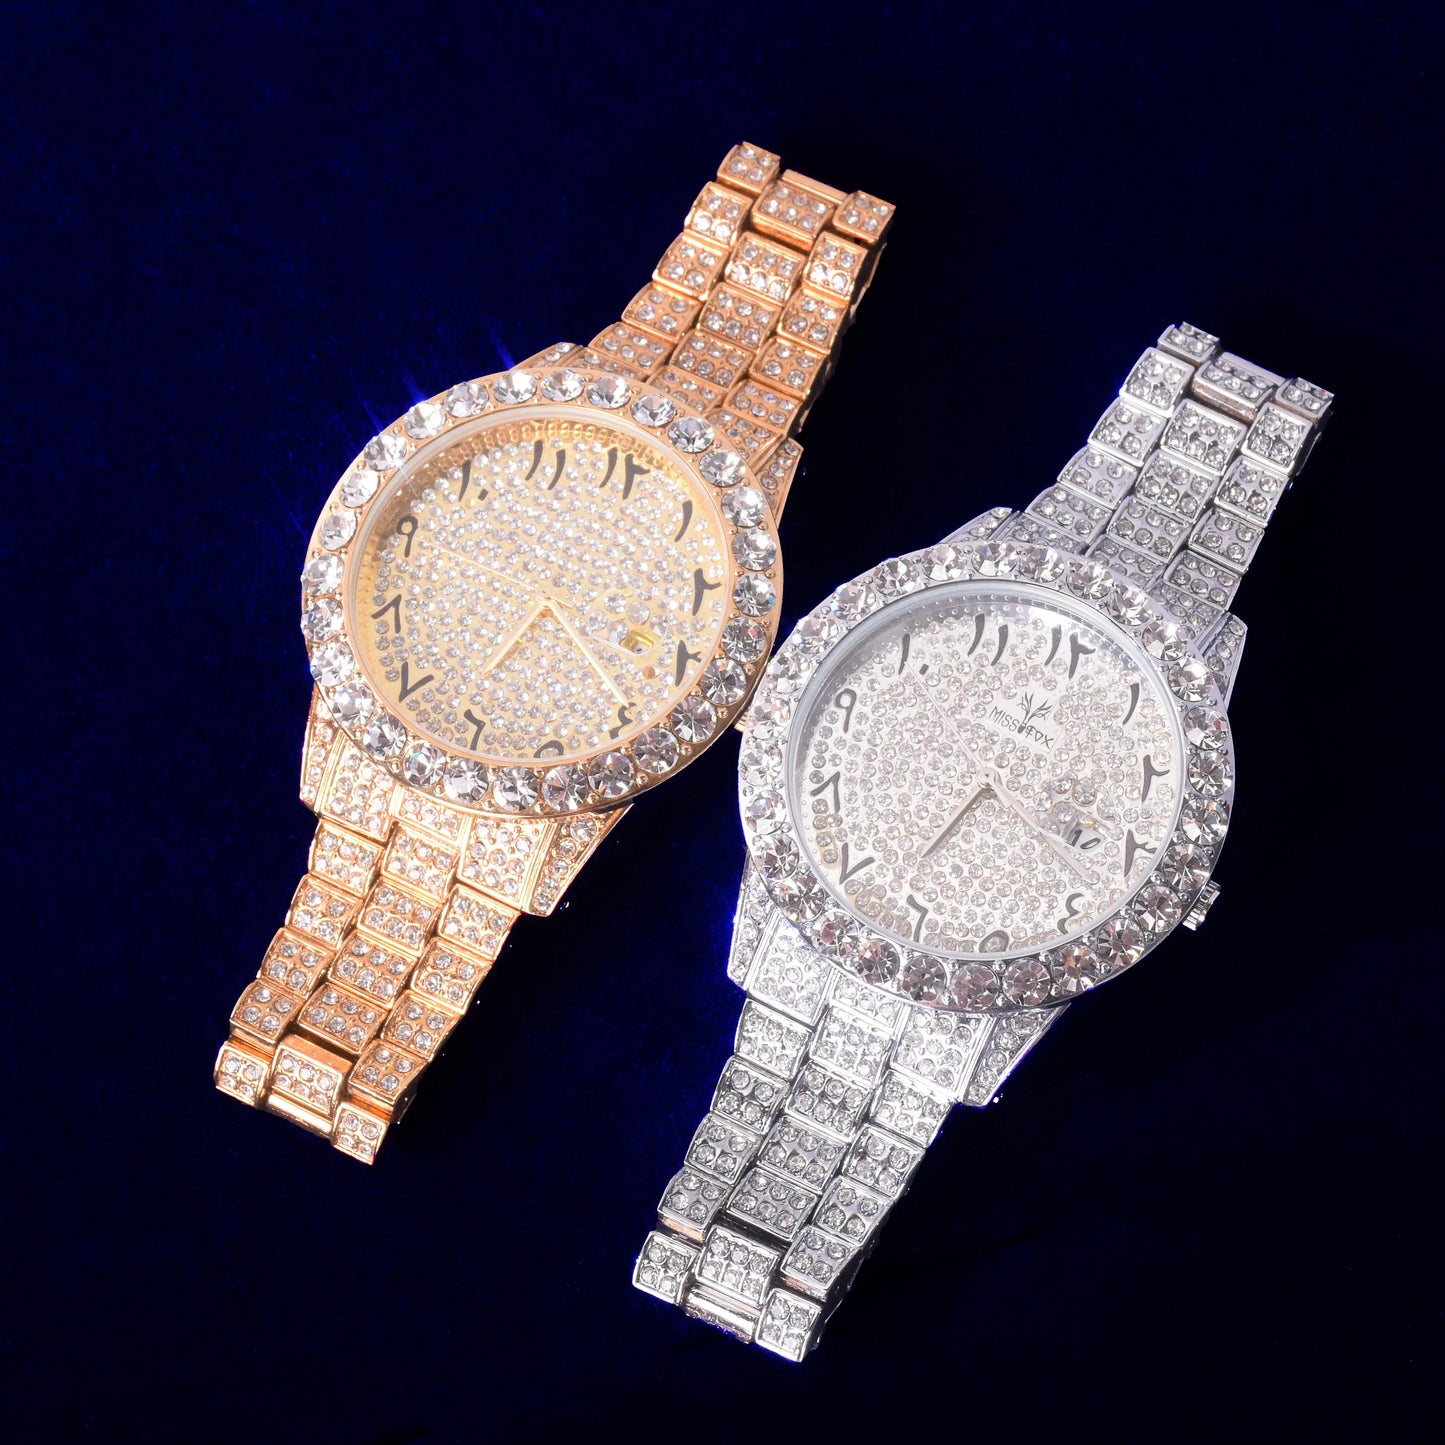 IceBox DC's Gold-Plated Iced Out "R-Arabian" Watch